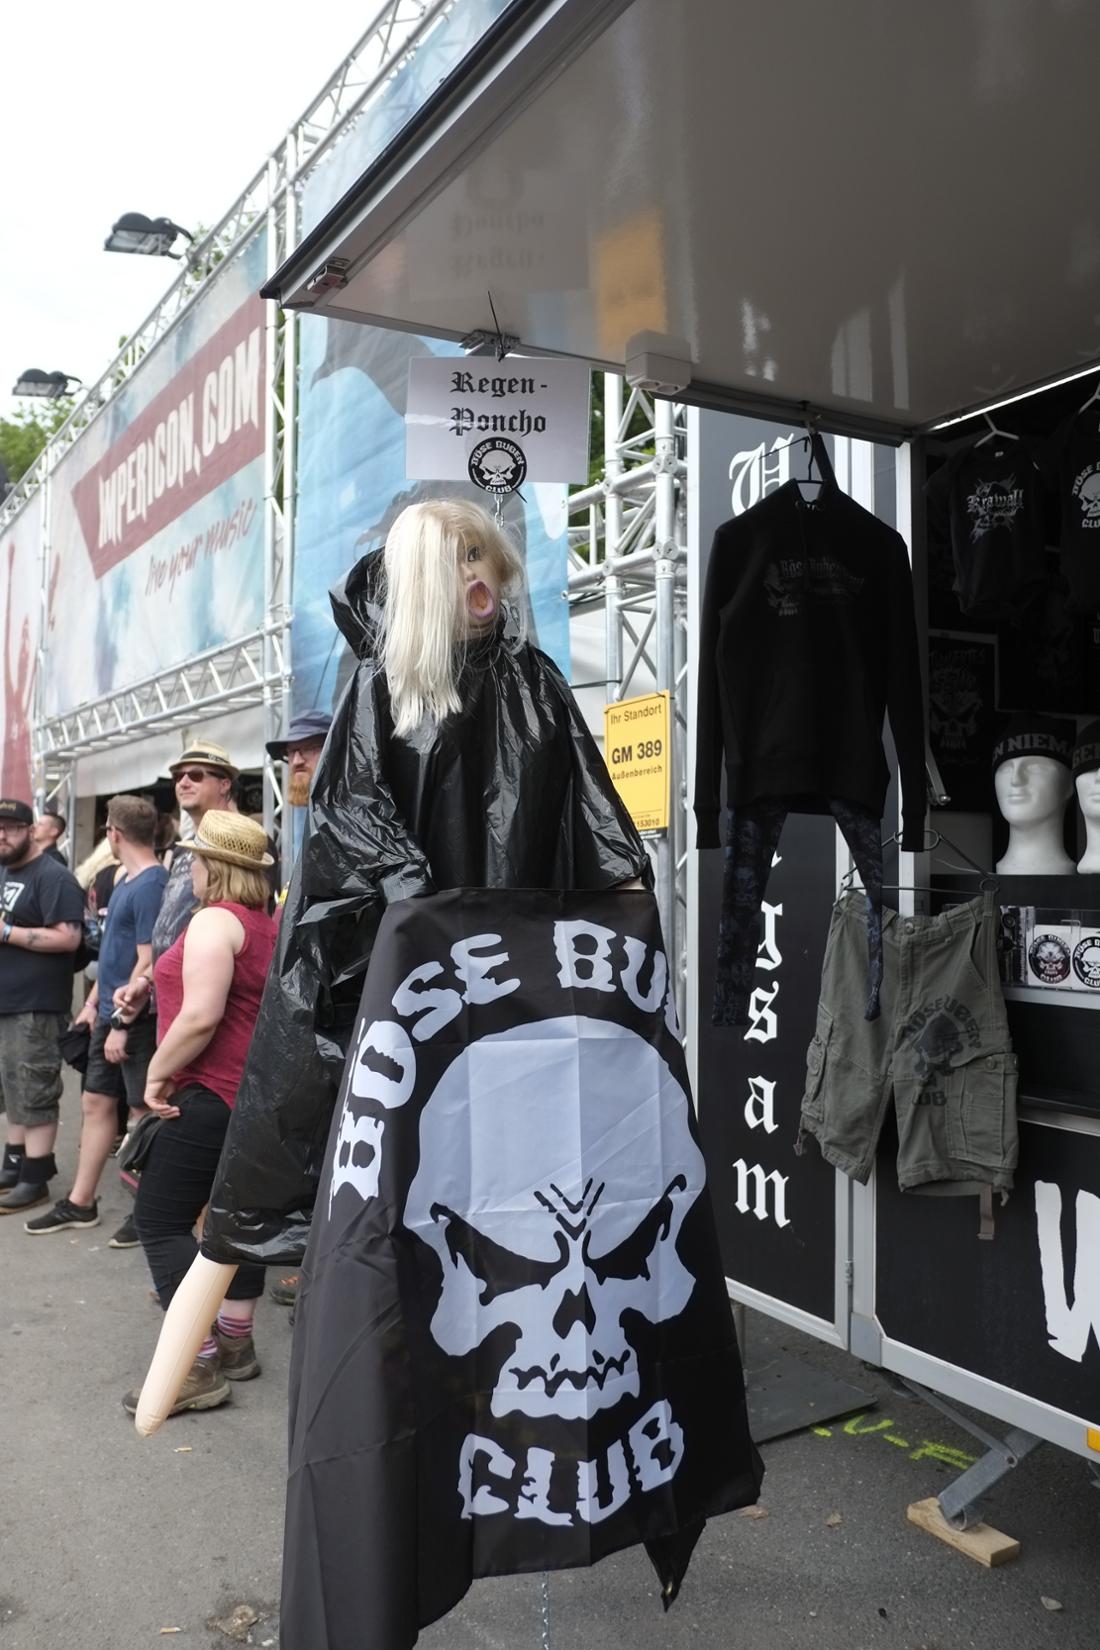 The Rock im Park Festival will take place again in 2022.  Fans can also browse the merch stand on the site.